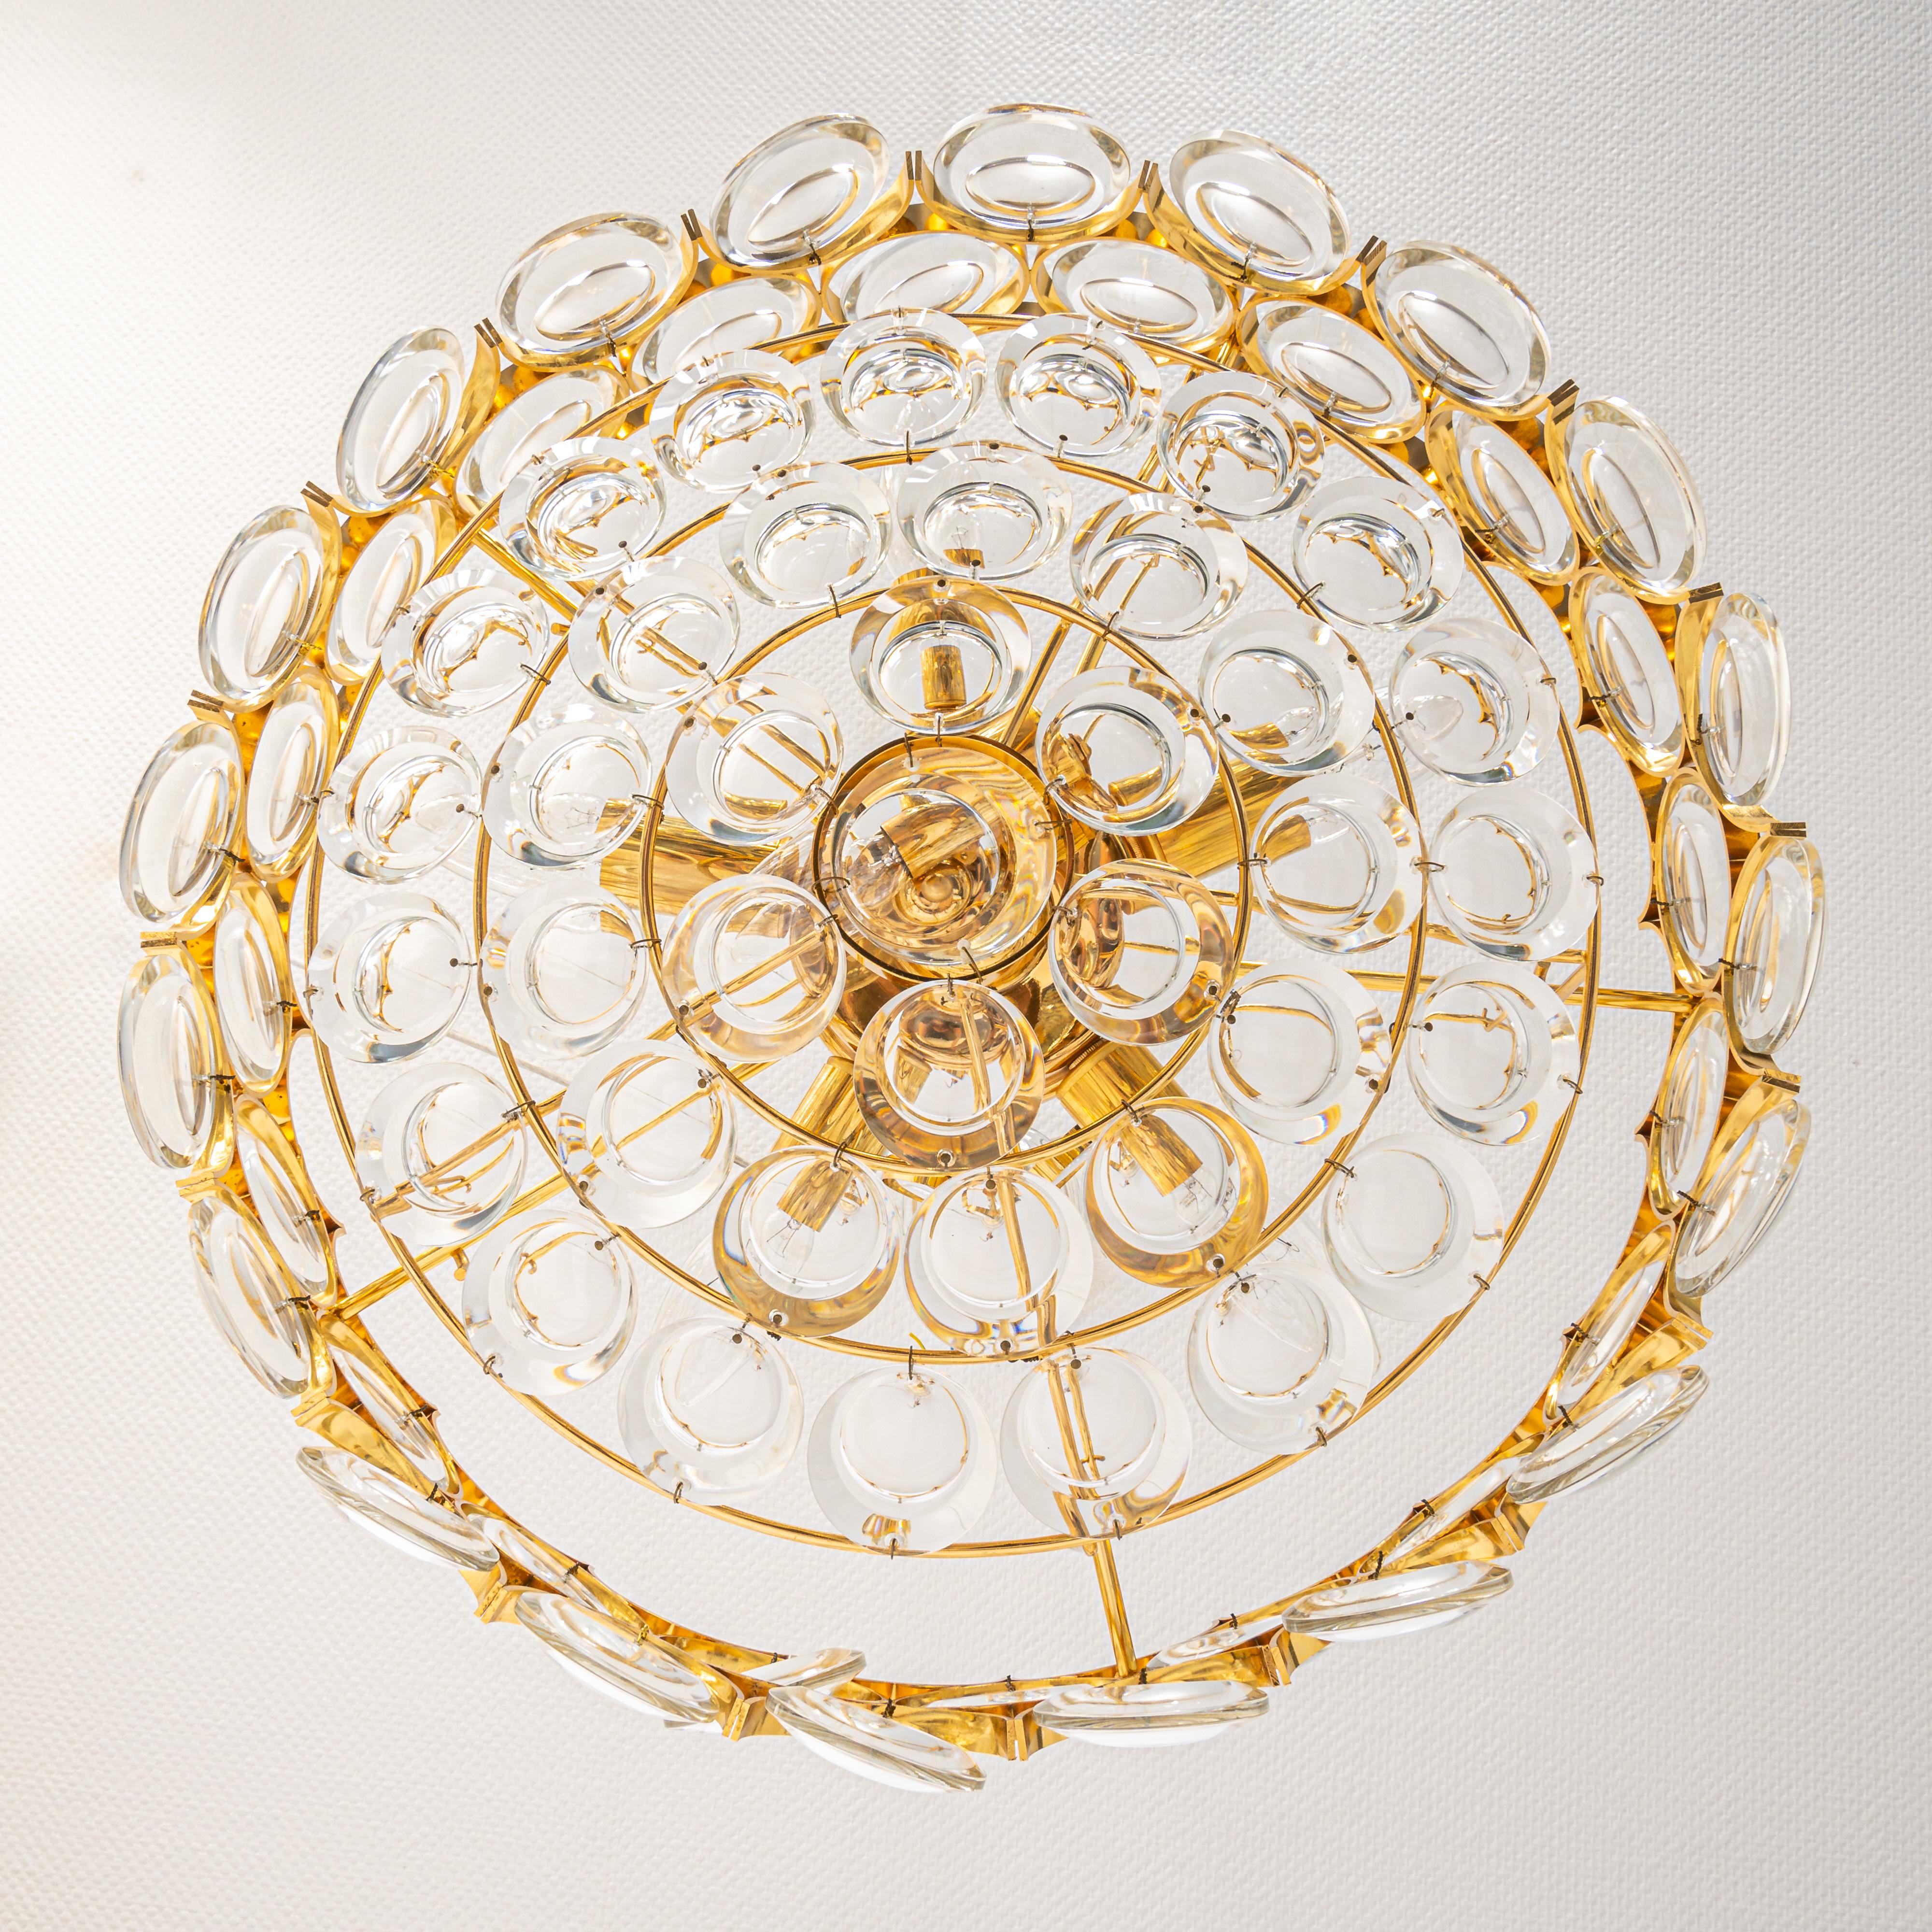 Brass and Crystal Chandelier, Sciolari Design by Palwa, Germany, 1970s For Sale 2